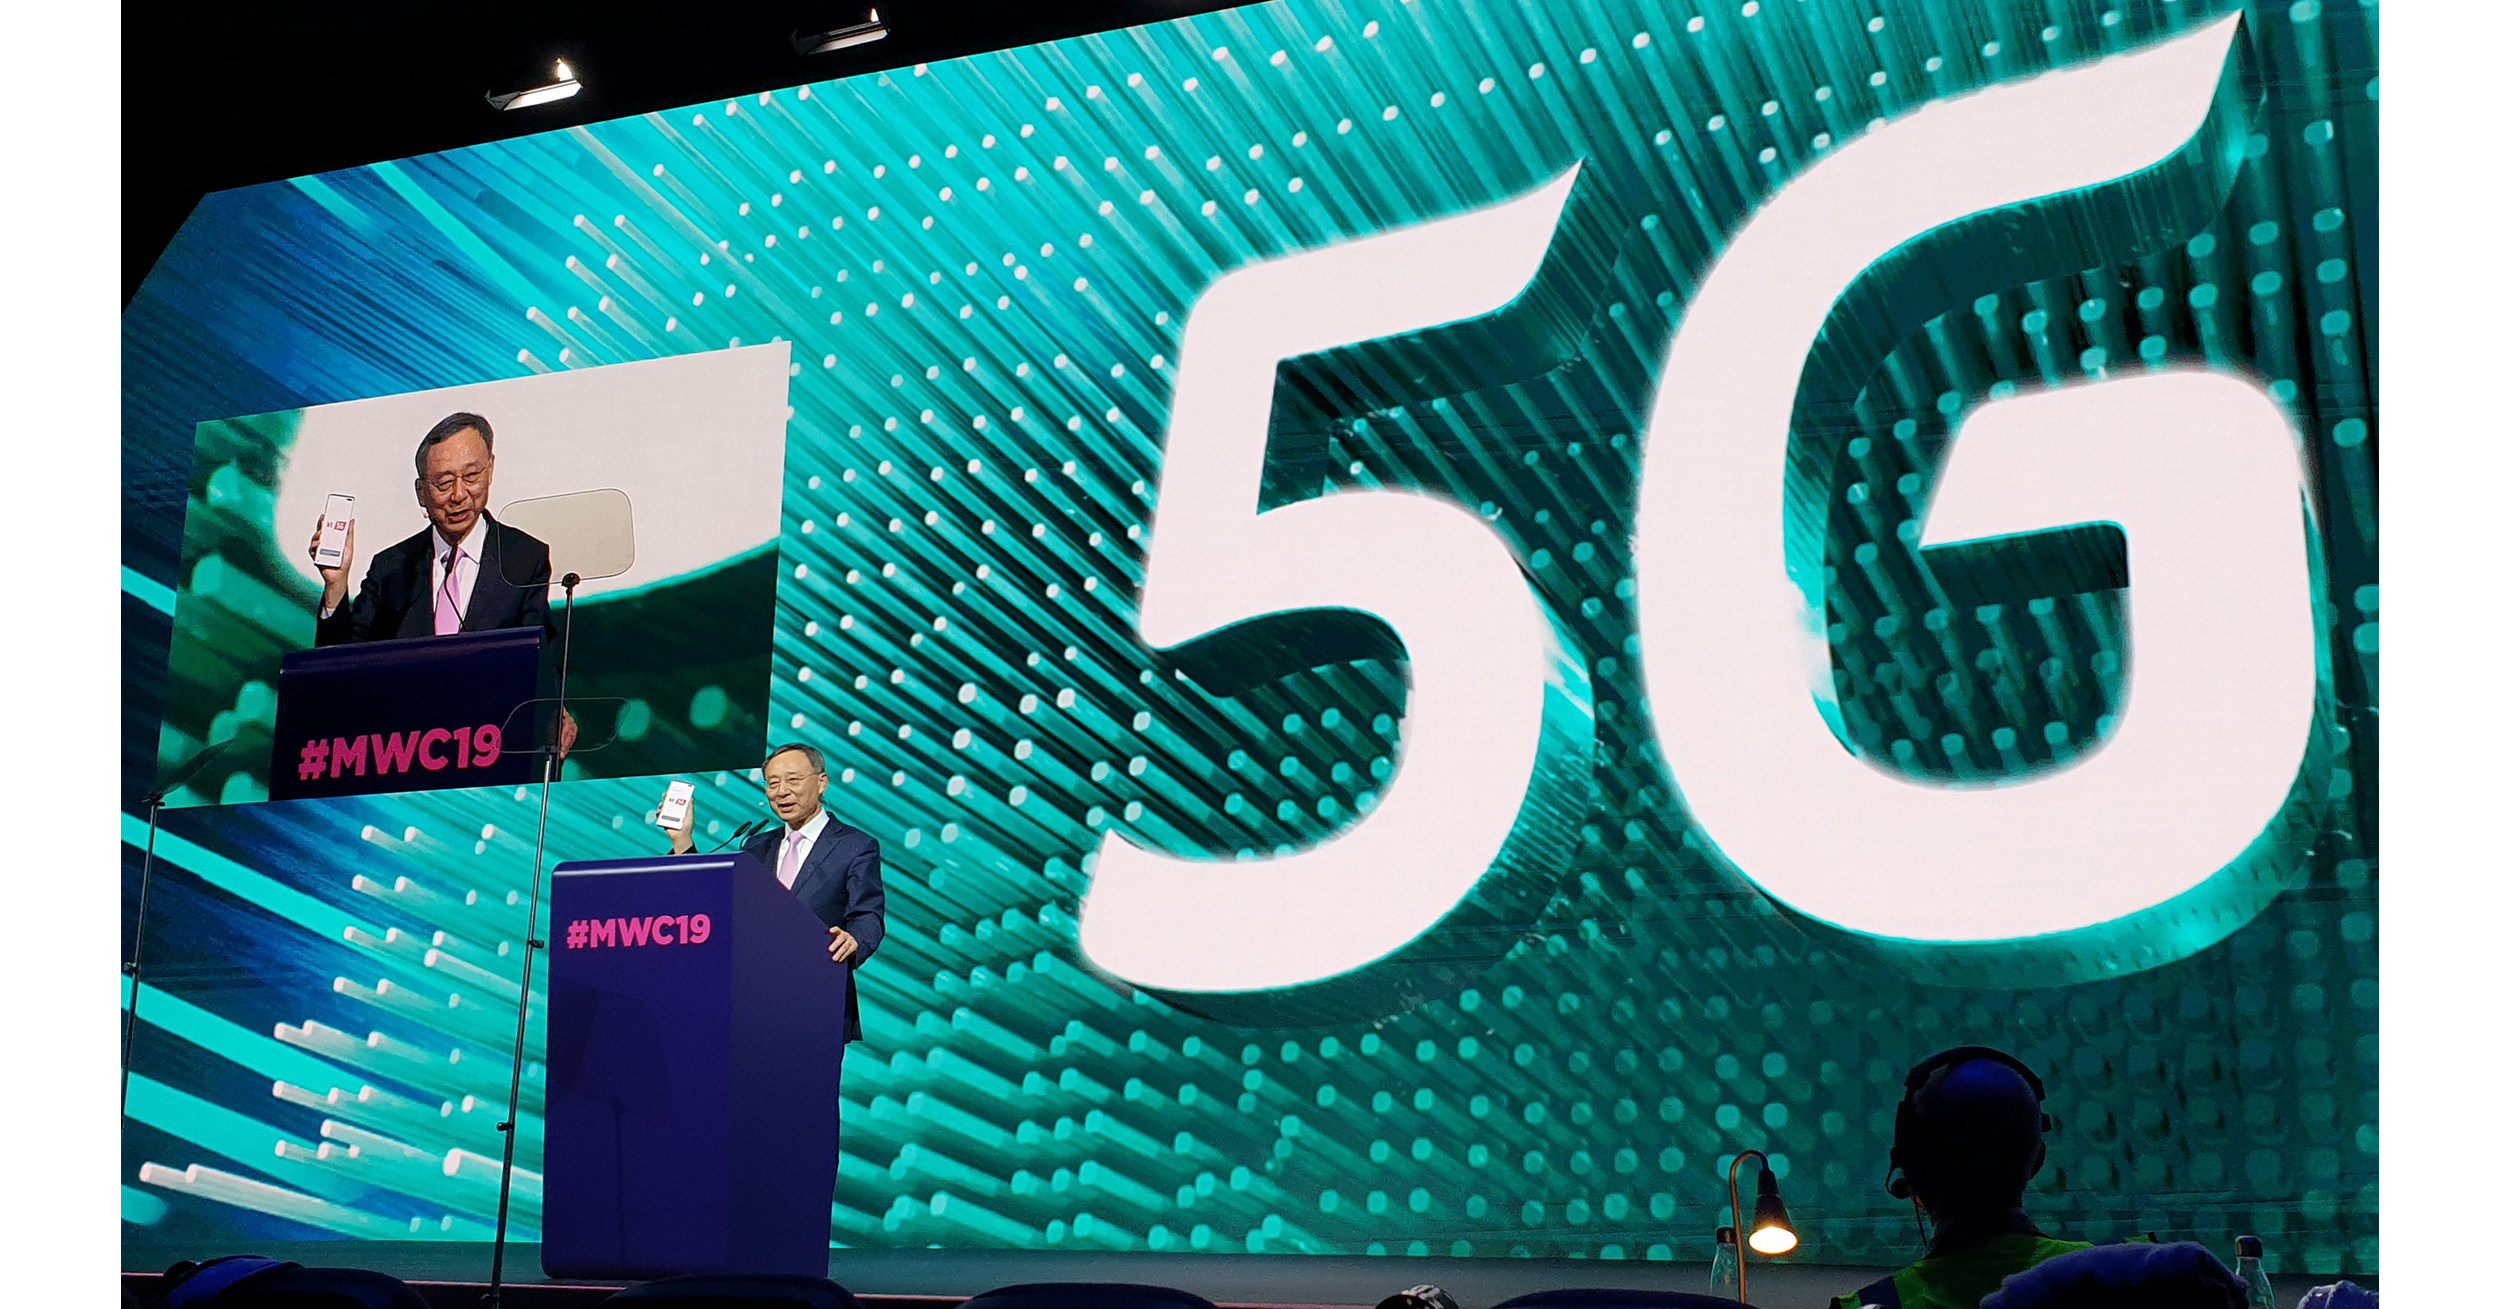 KT Corp. Debuts New 5G Services at MWC 2019